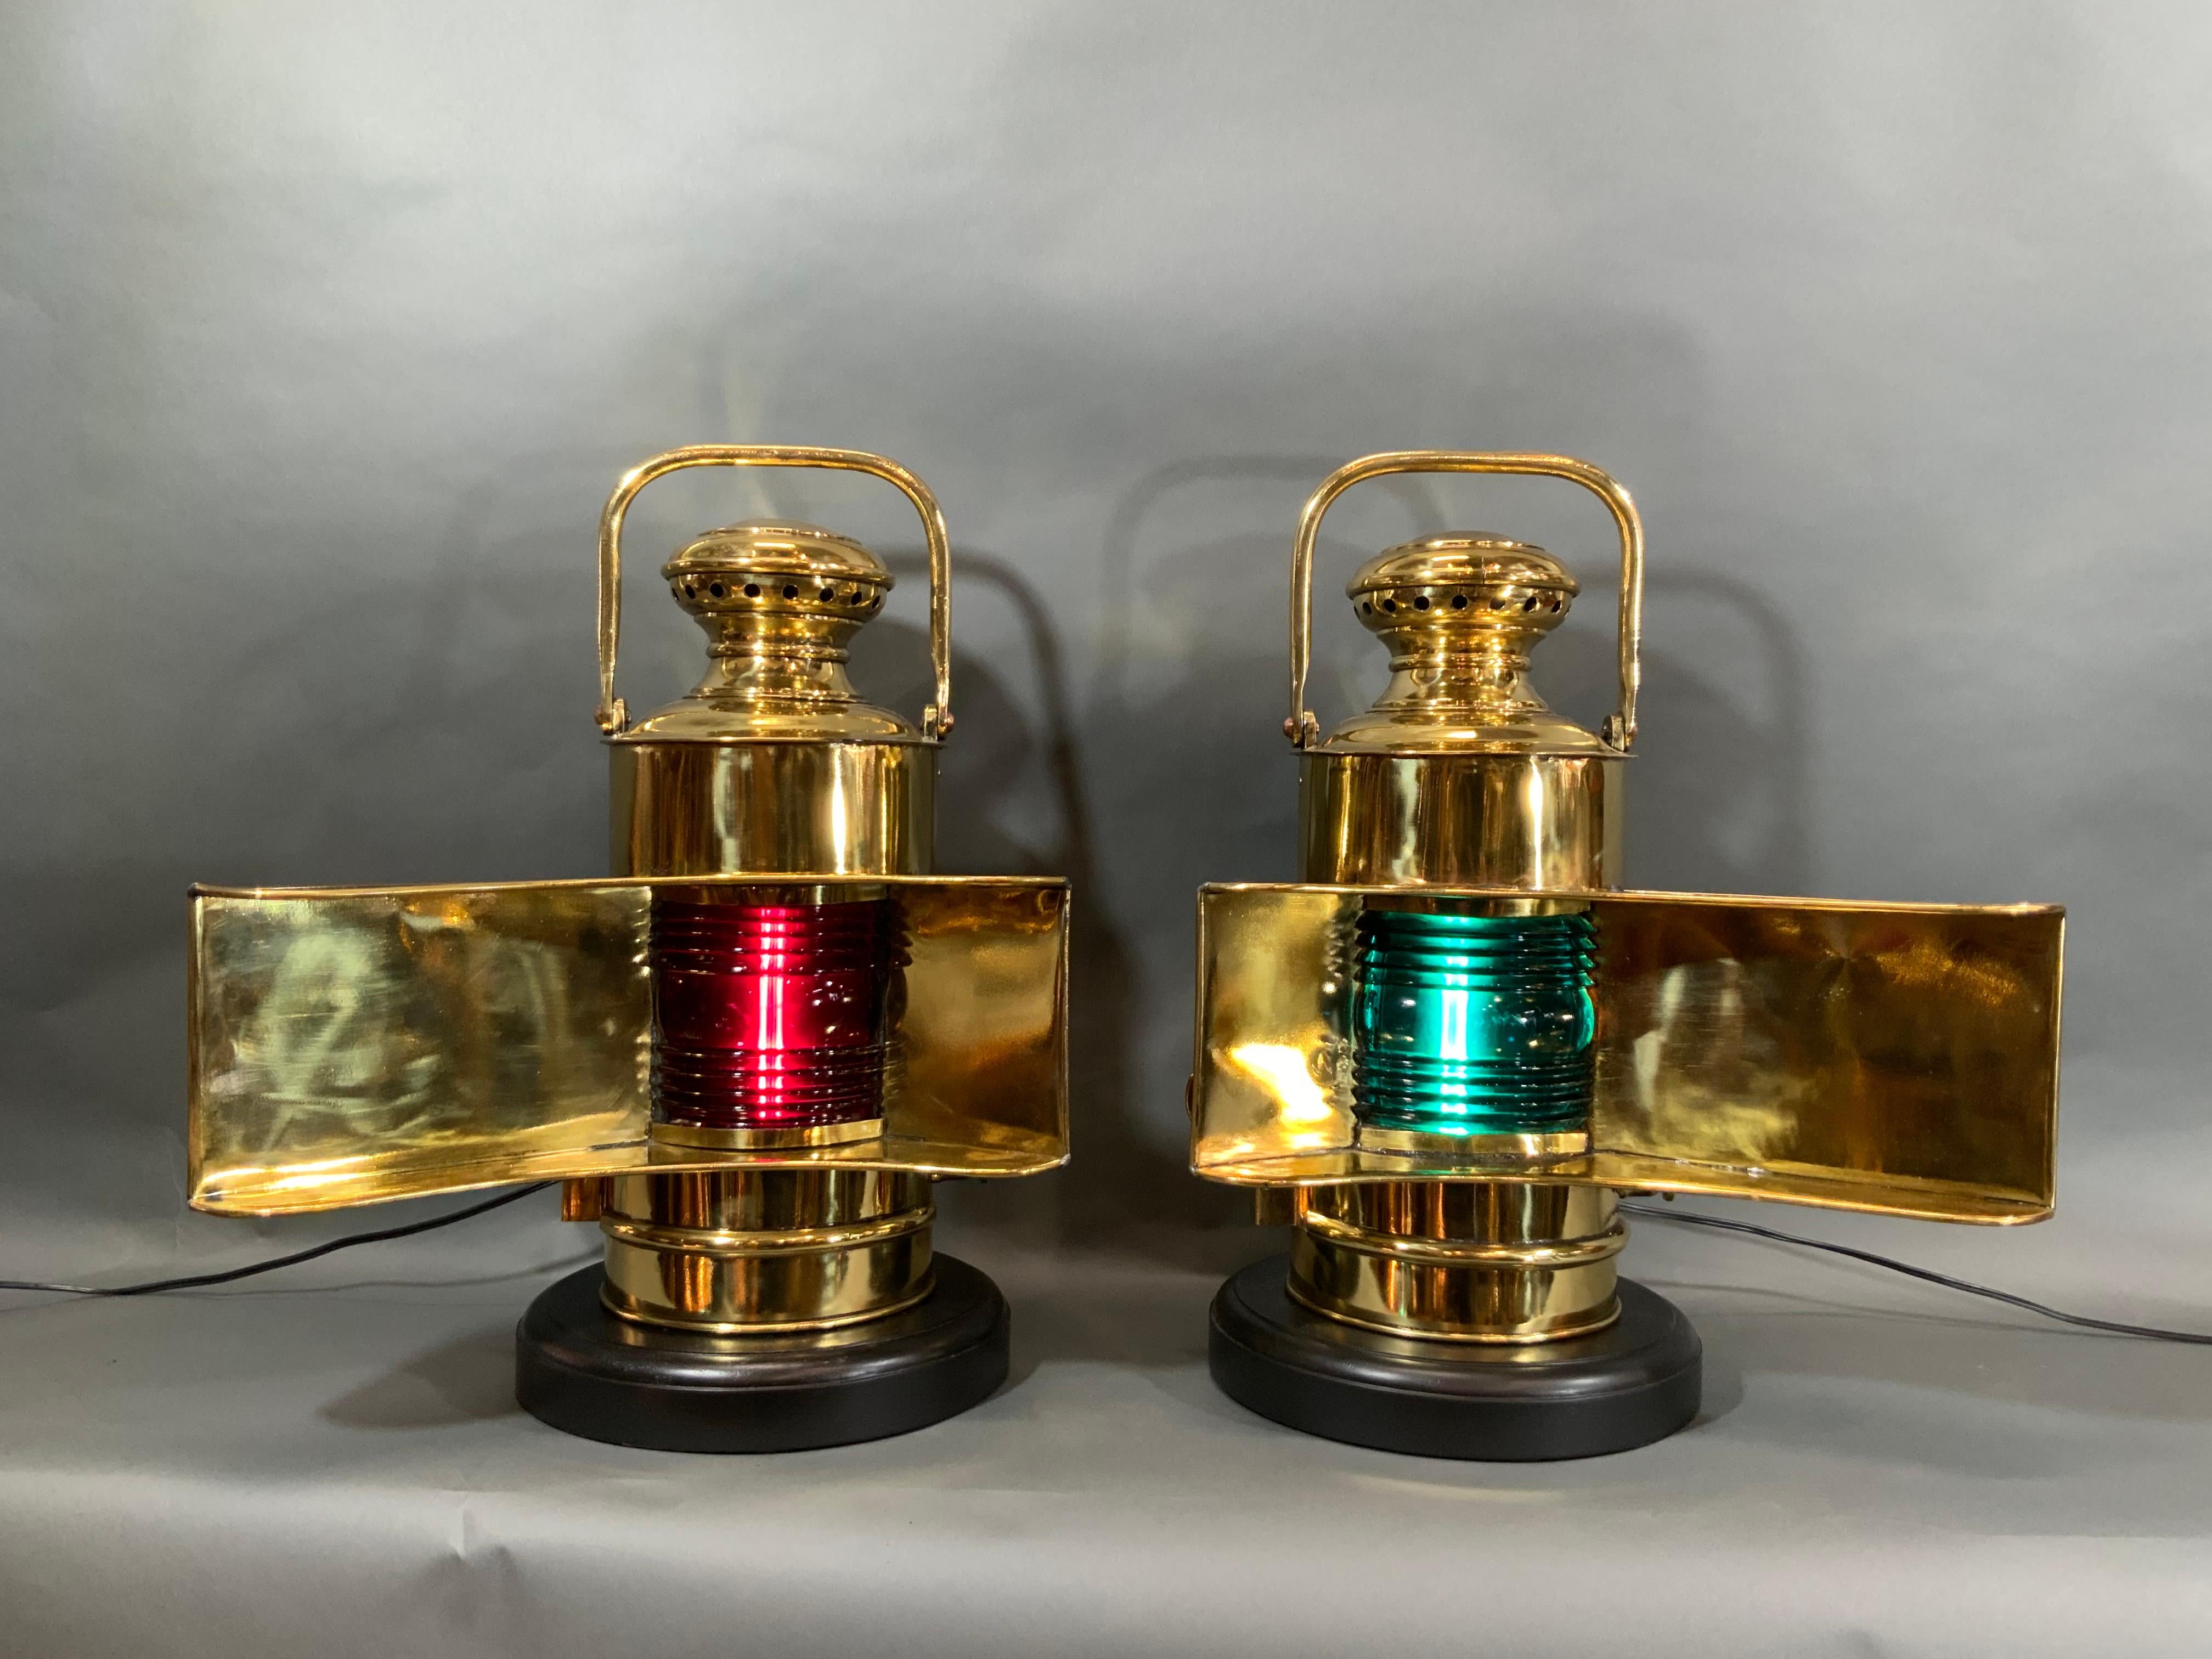 U.S. Navy pair of “wing to wing’” bridge lanterns from the early twentieth century. They have been stripped of the military paint and meticulously polished and lacquered. The long vanes are striking. Very sturdy with hinged rear doors. Both have